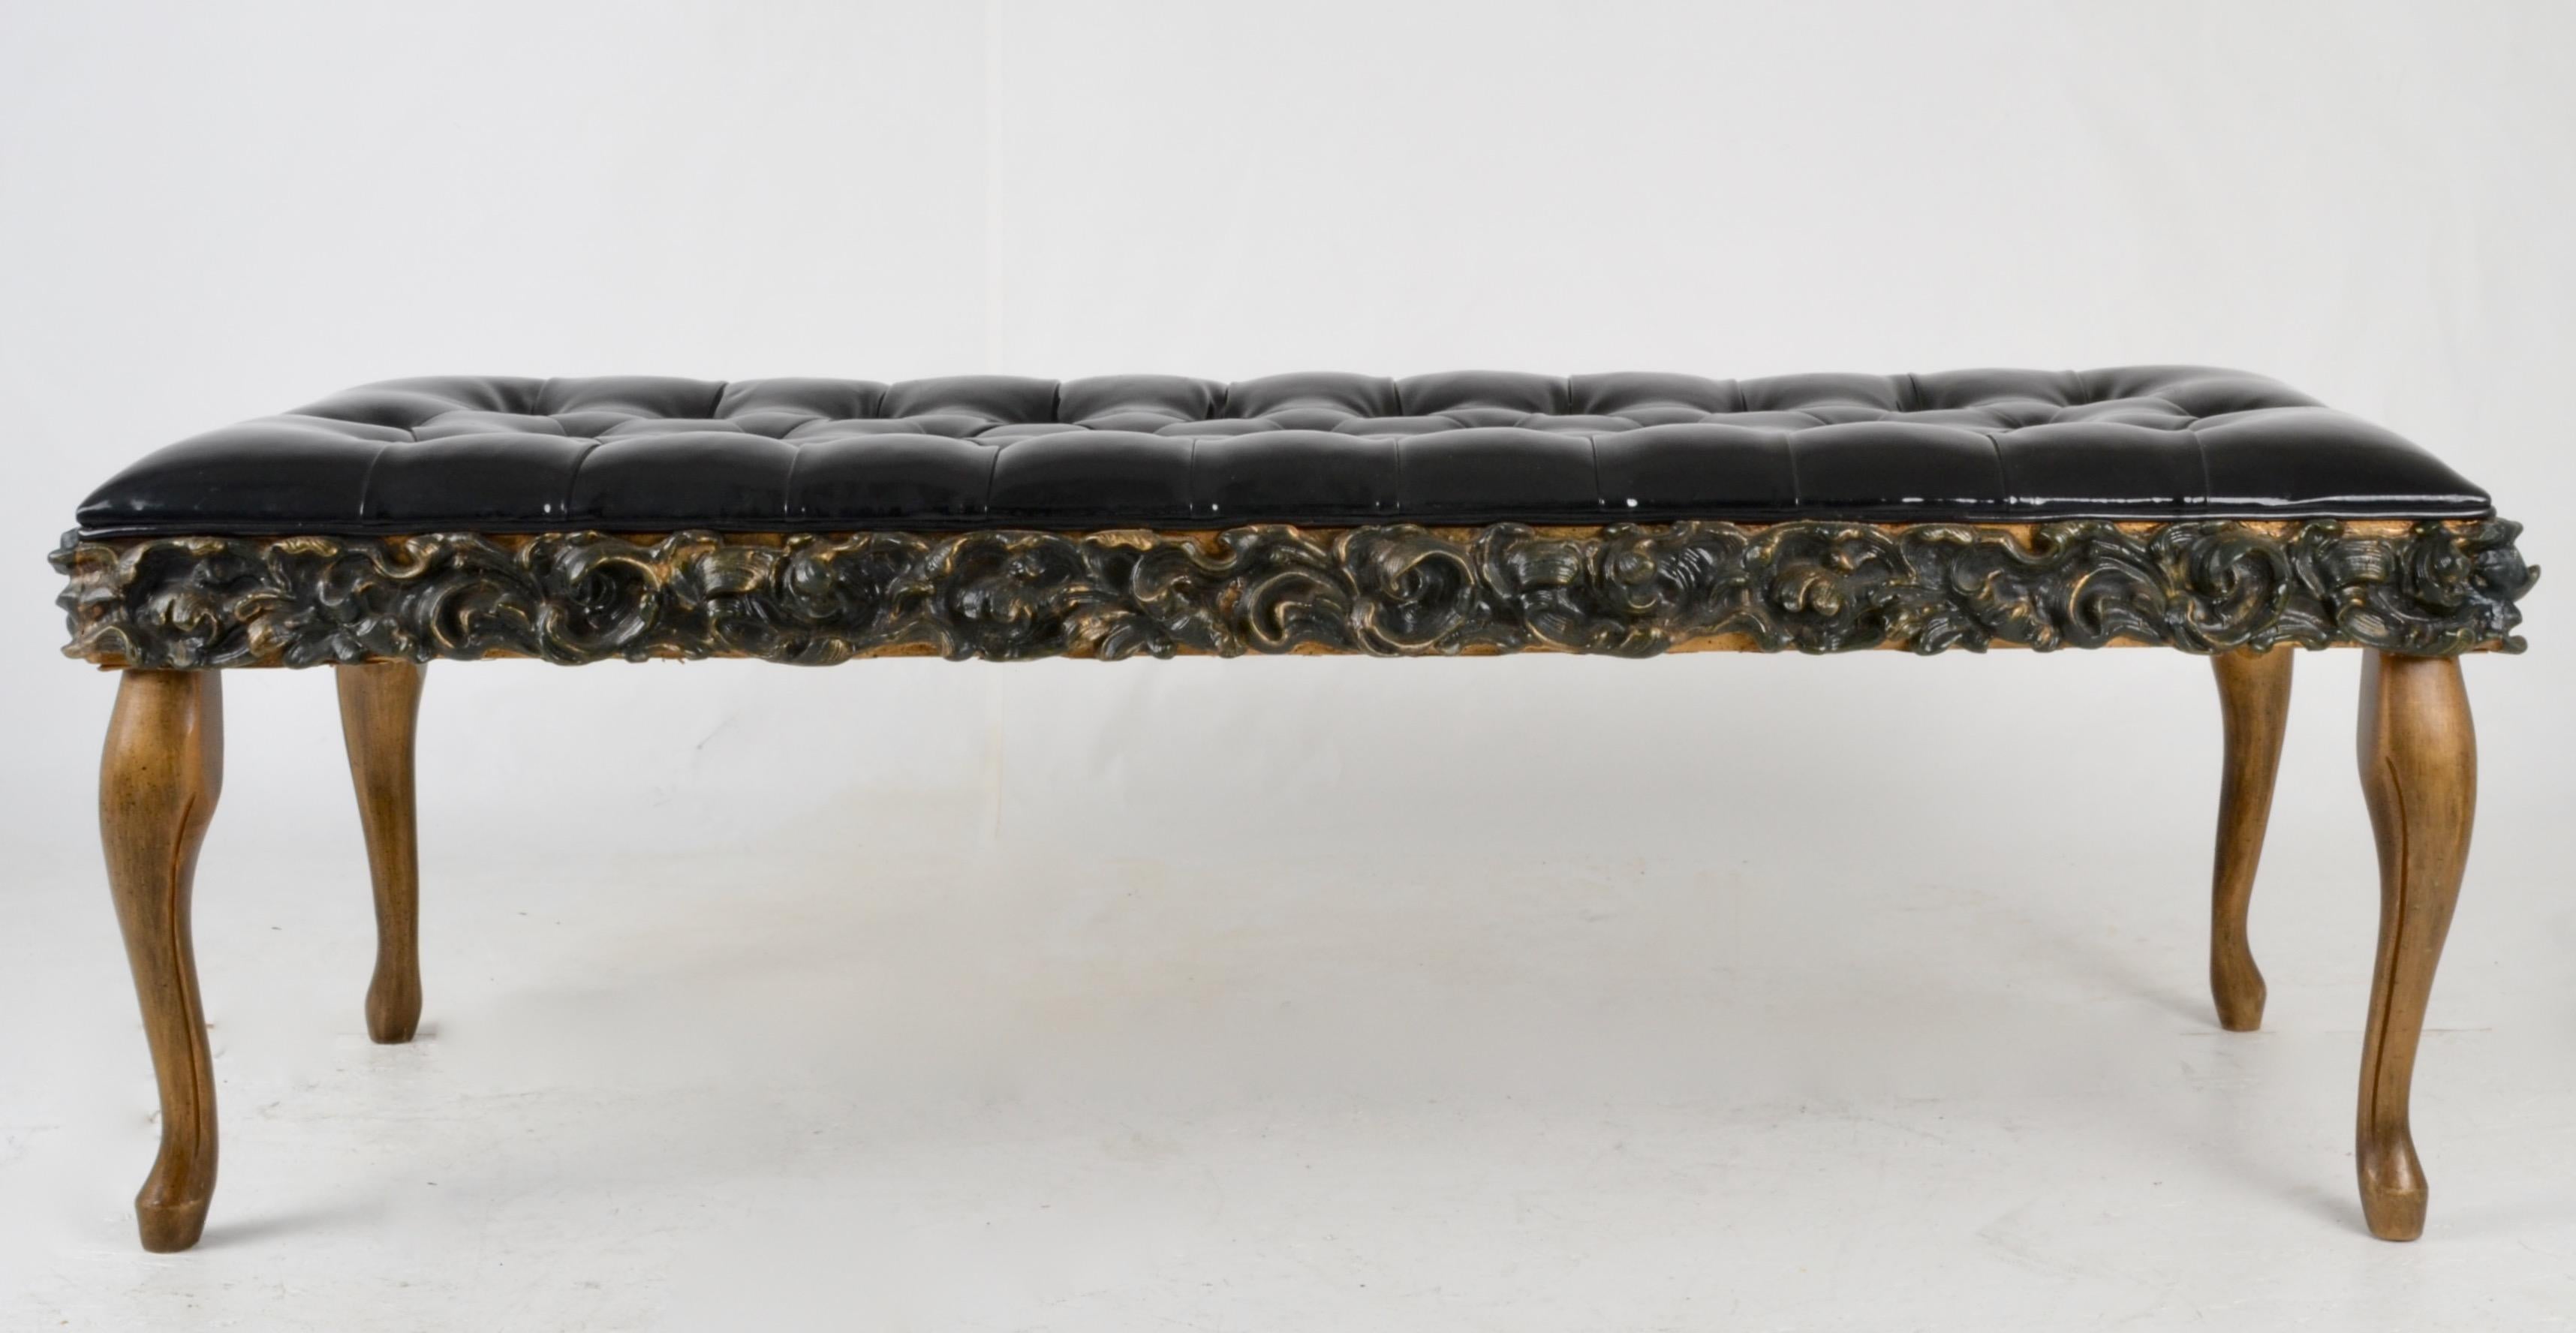 Unusual carved and applied wood decoration bench with a tufted upholstered top in faux patent leather. Nice size.